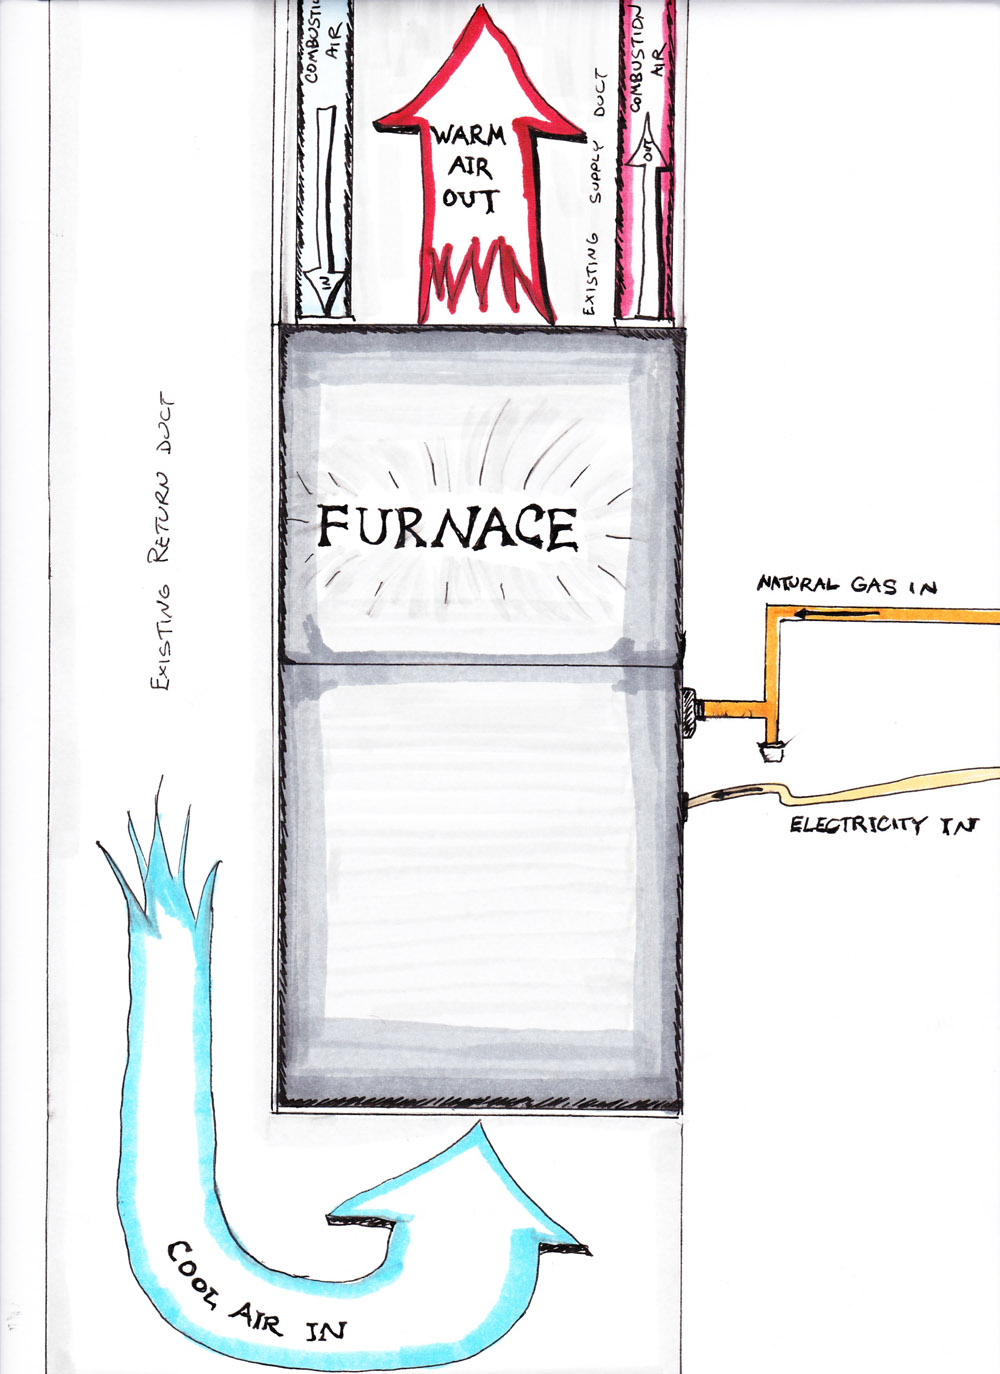 How to Replace Your Own Furnace natural gas flammability diagram 